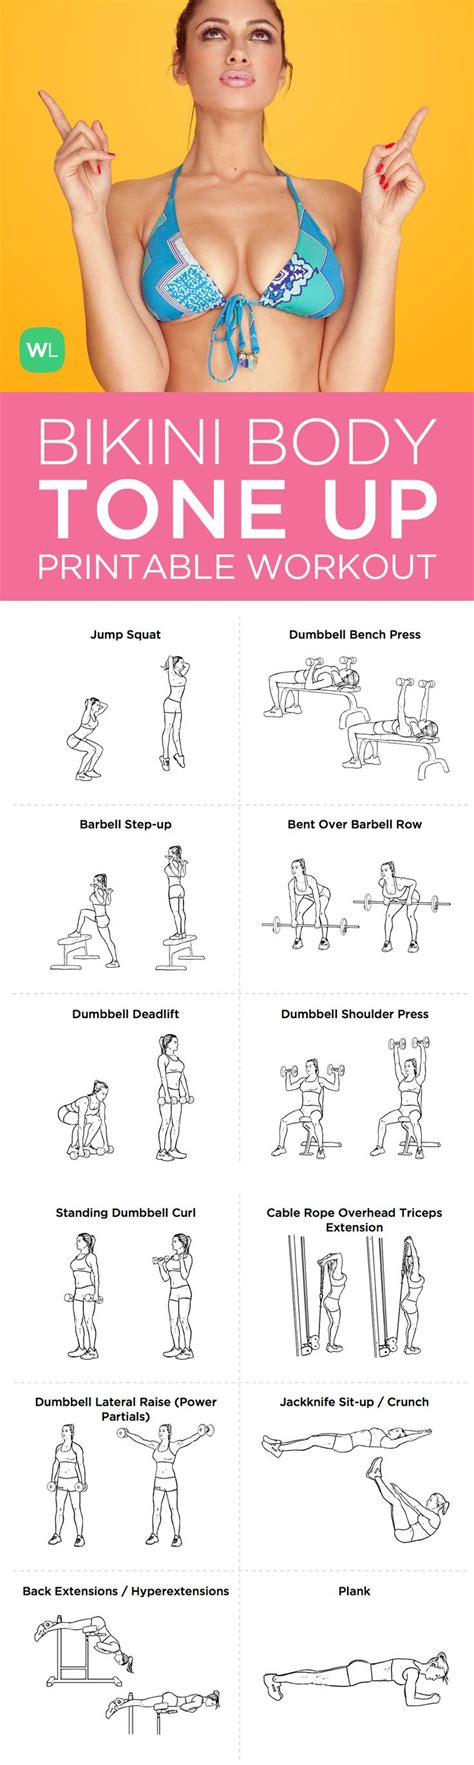 These are the 50 best resources for free online workouts that make is easy for you to exercise at home. 6 Best Images of Free Printable Workout Plans - Free ...